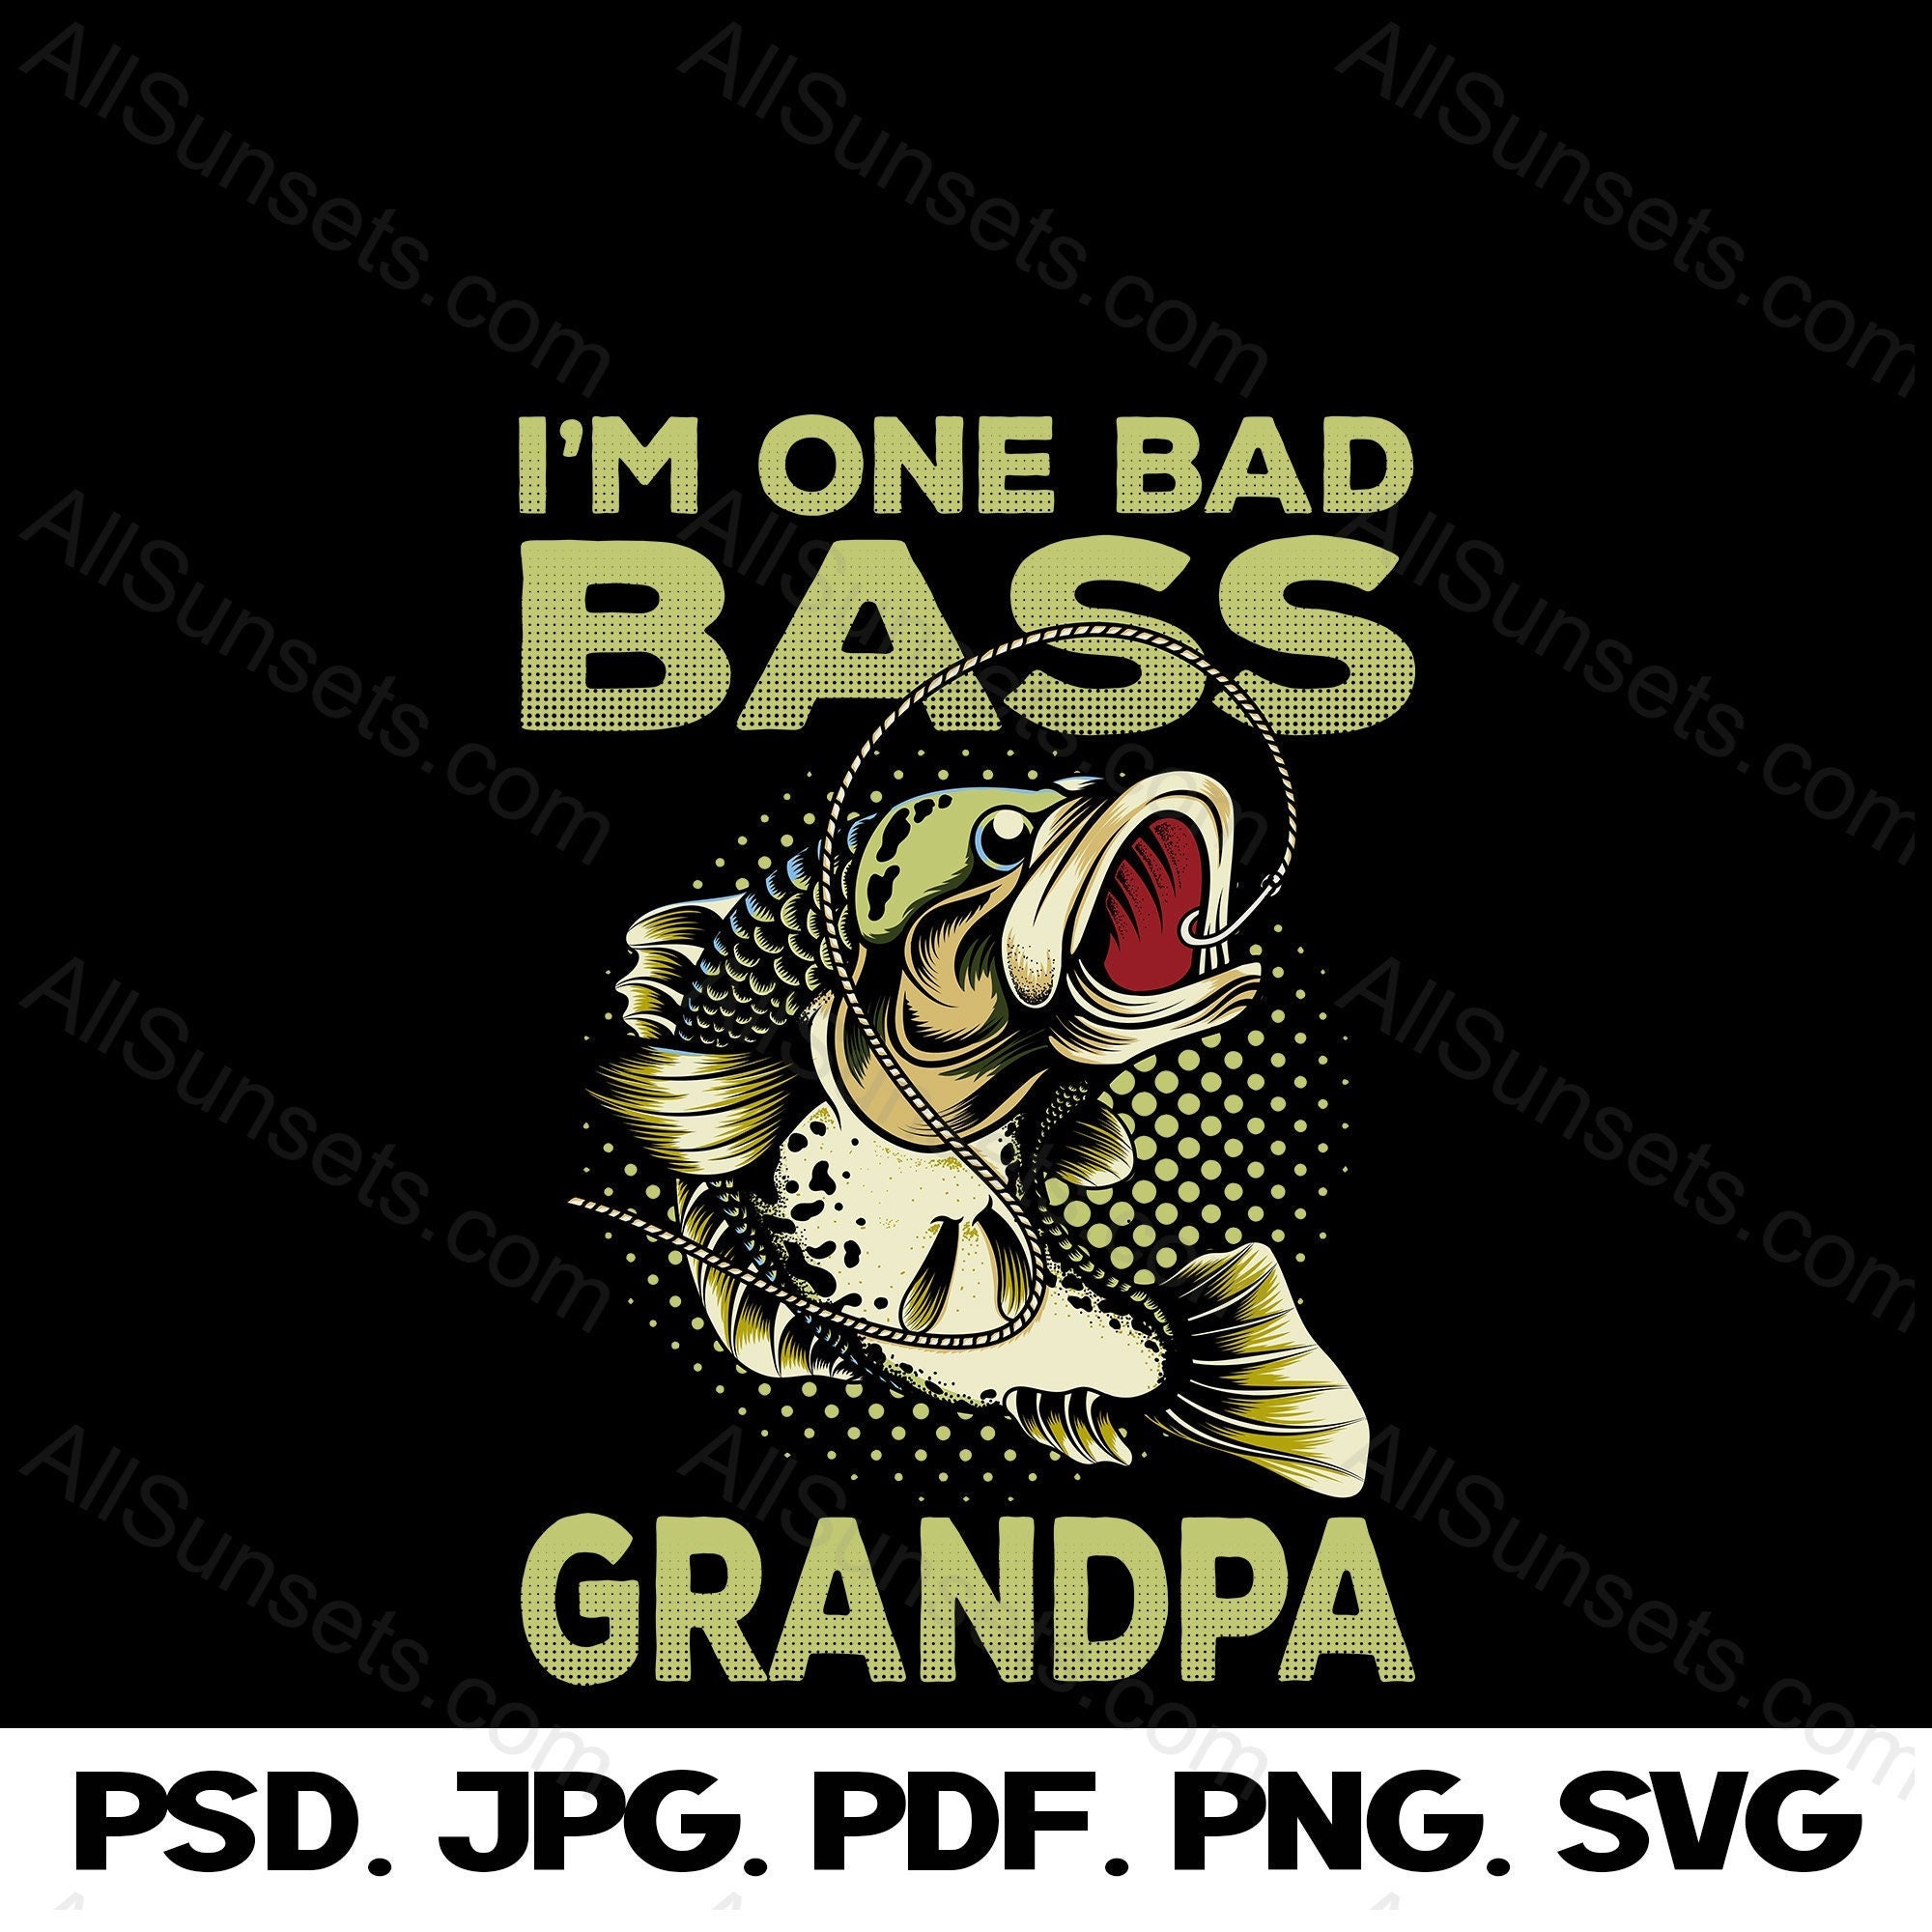 Fishing T-shirt Design I'm One Bad Bass Grandpa Fisherman Print on Demand  or at Home Graphic PNG SVG PSD Pdf Jpg File Format -  Canada